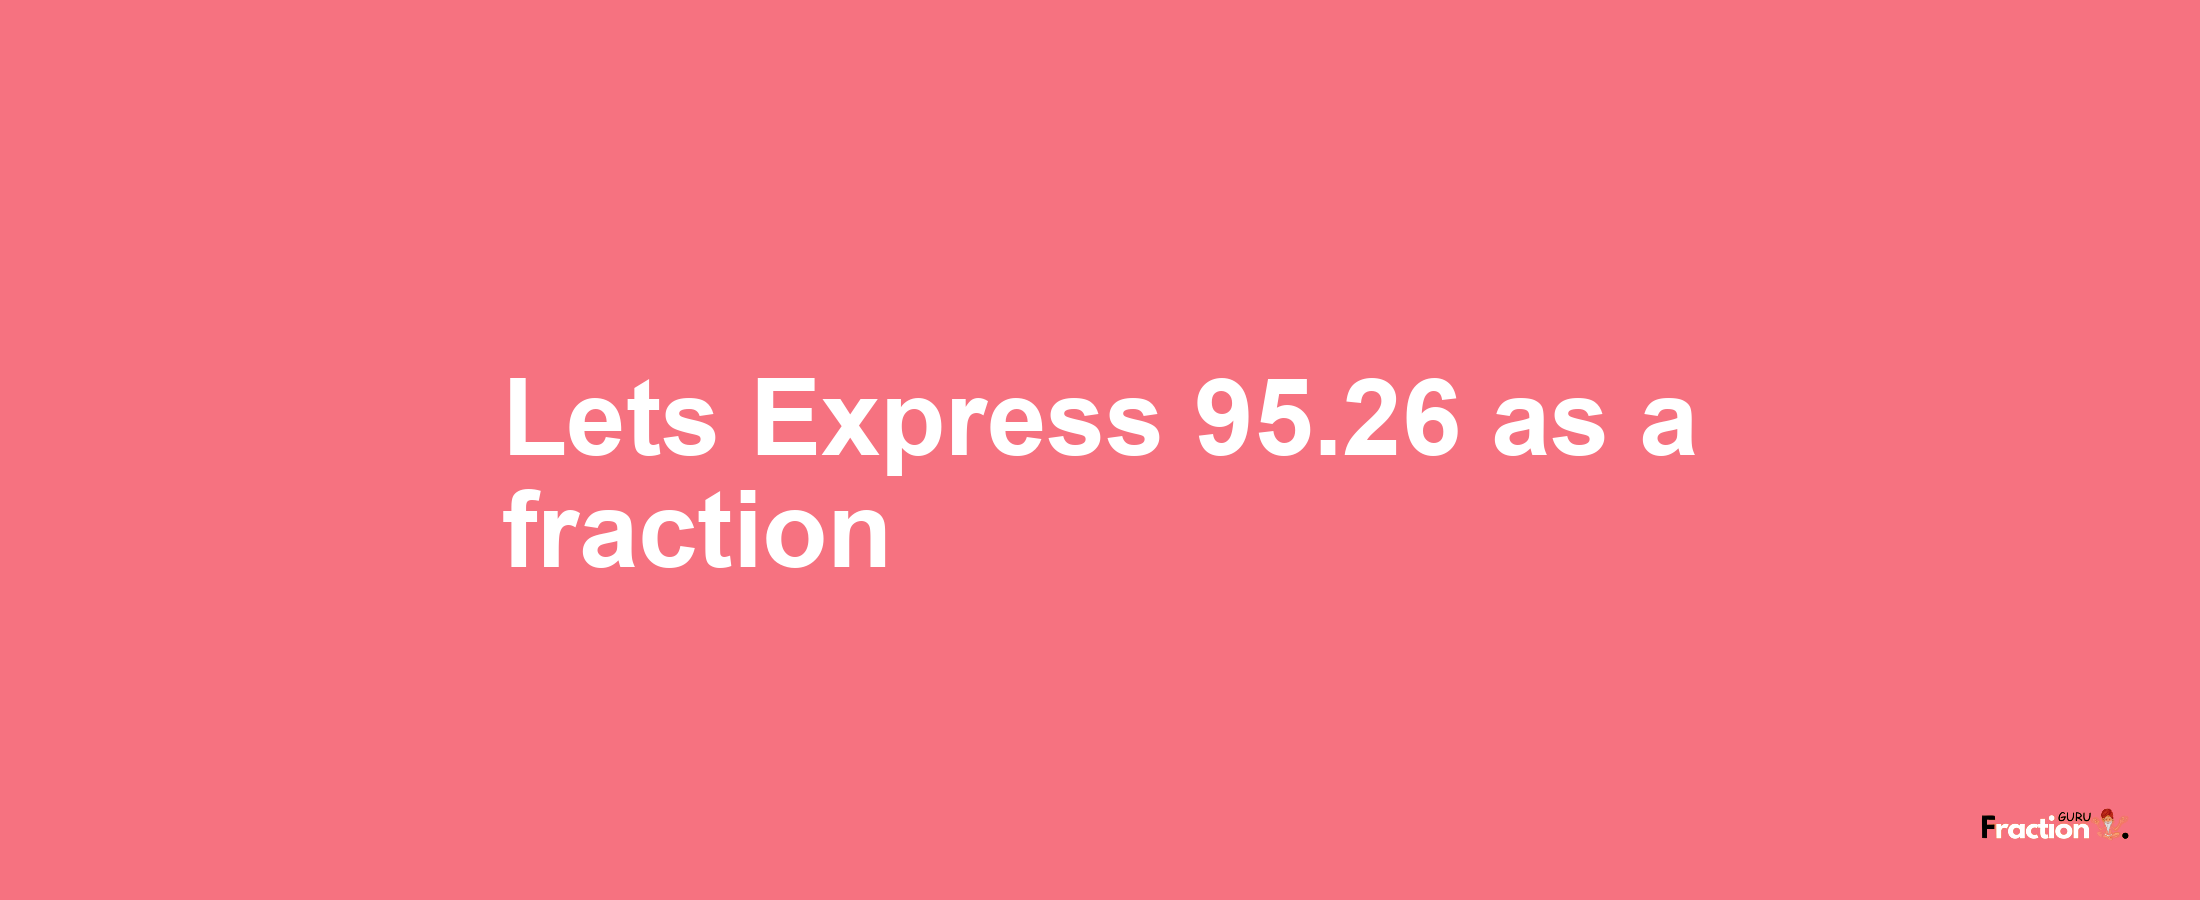 Lets Express 95.26 as afraction